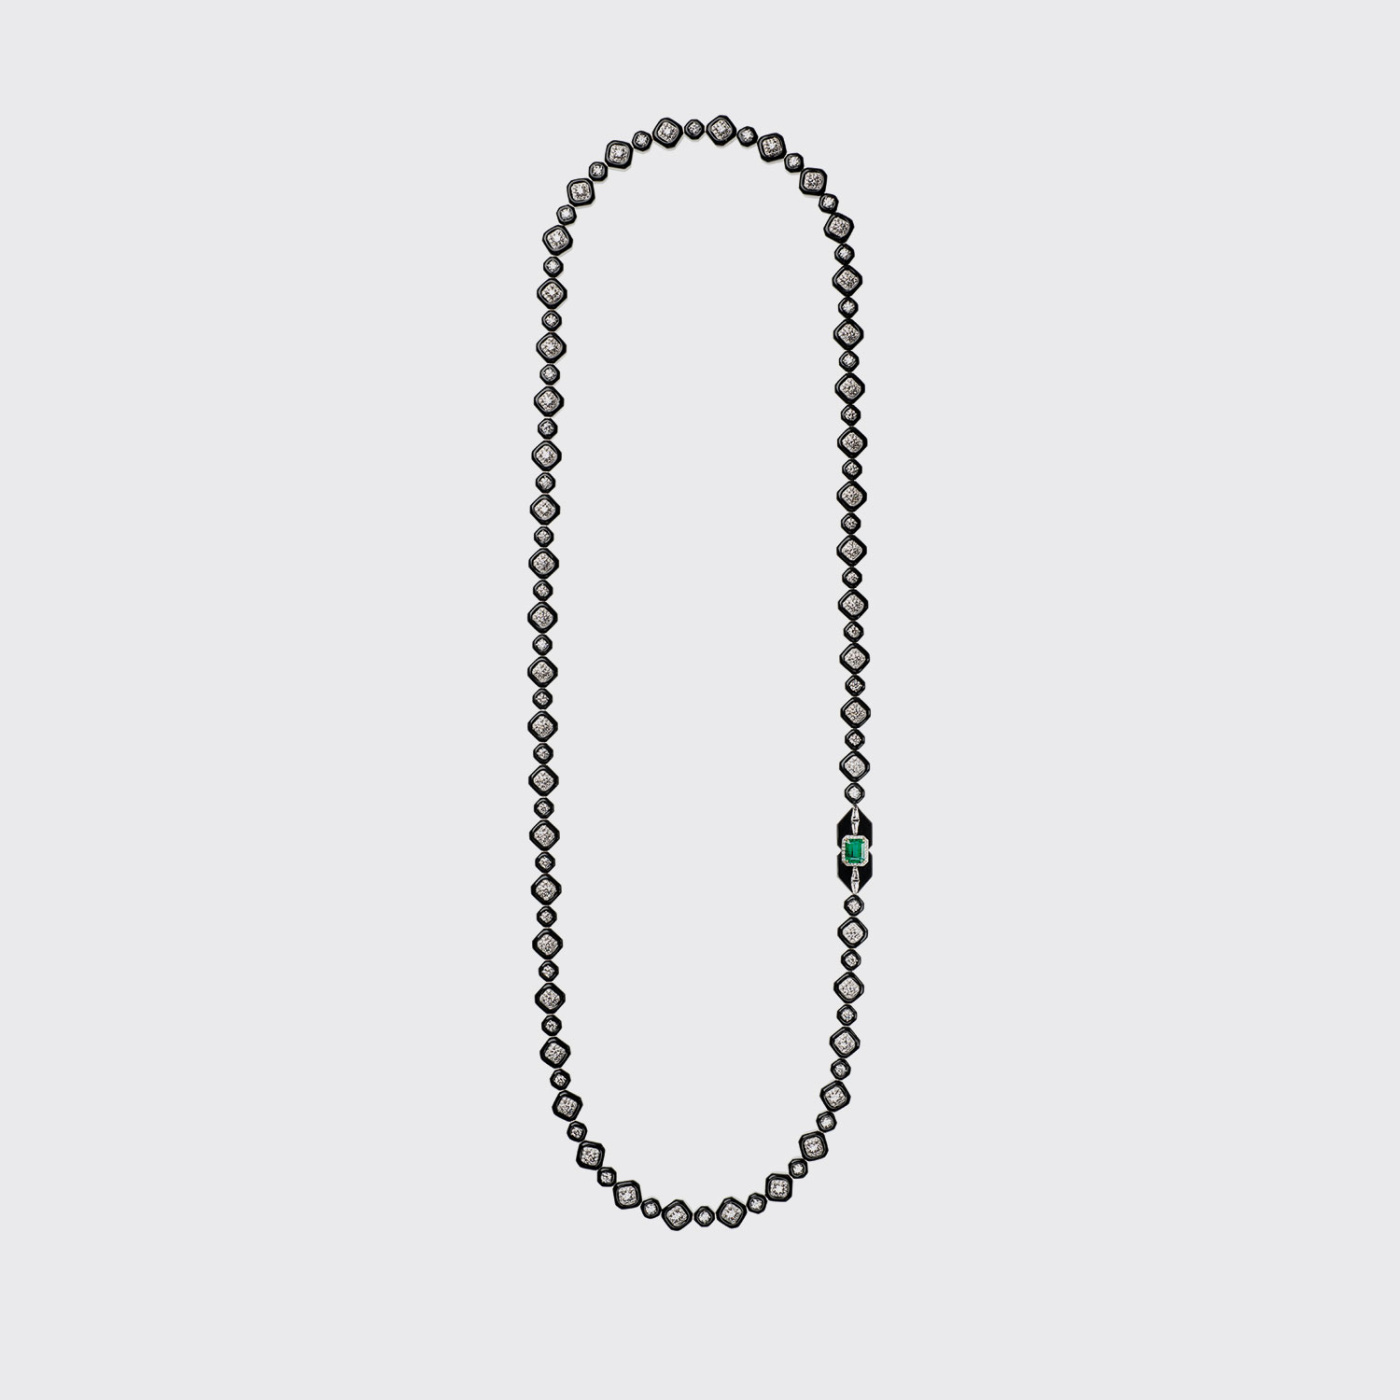 White gold long necklace with white diamonds, emeralds and black enamel